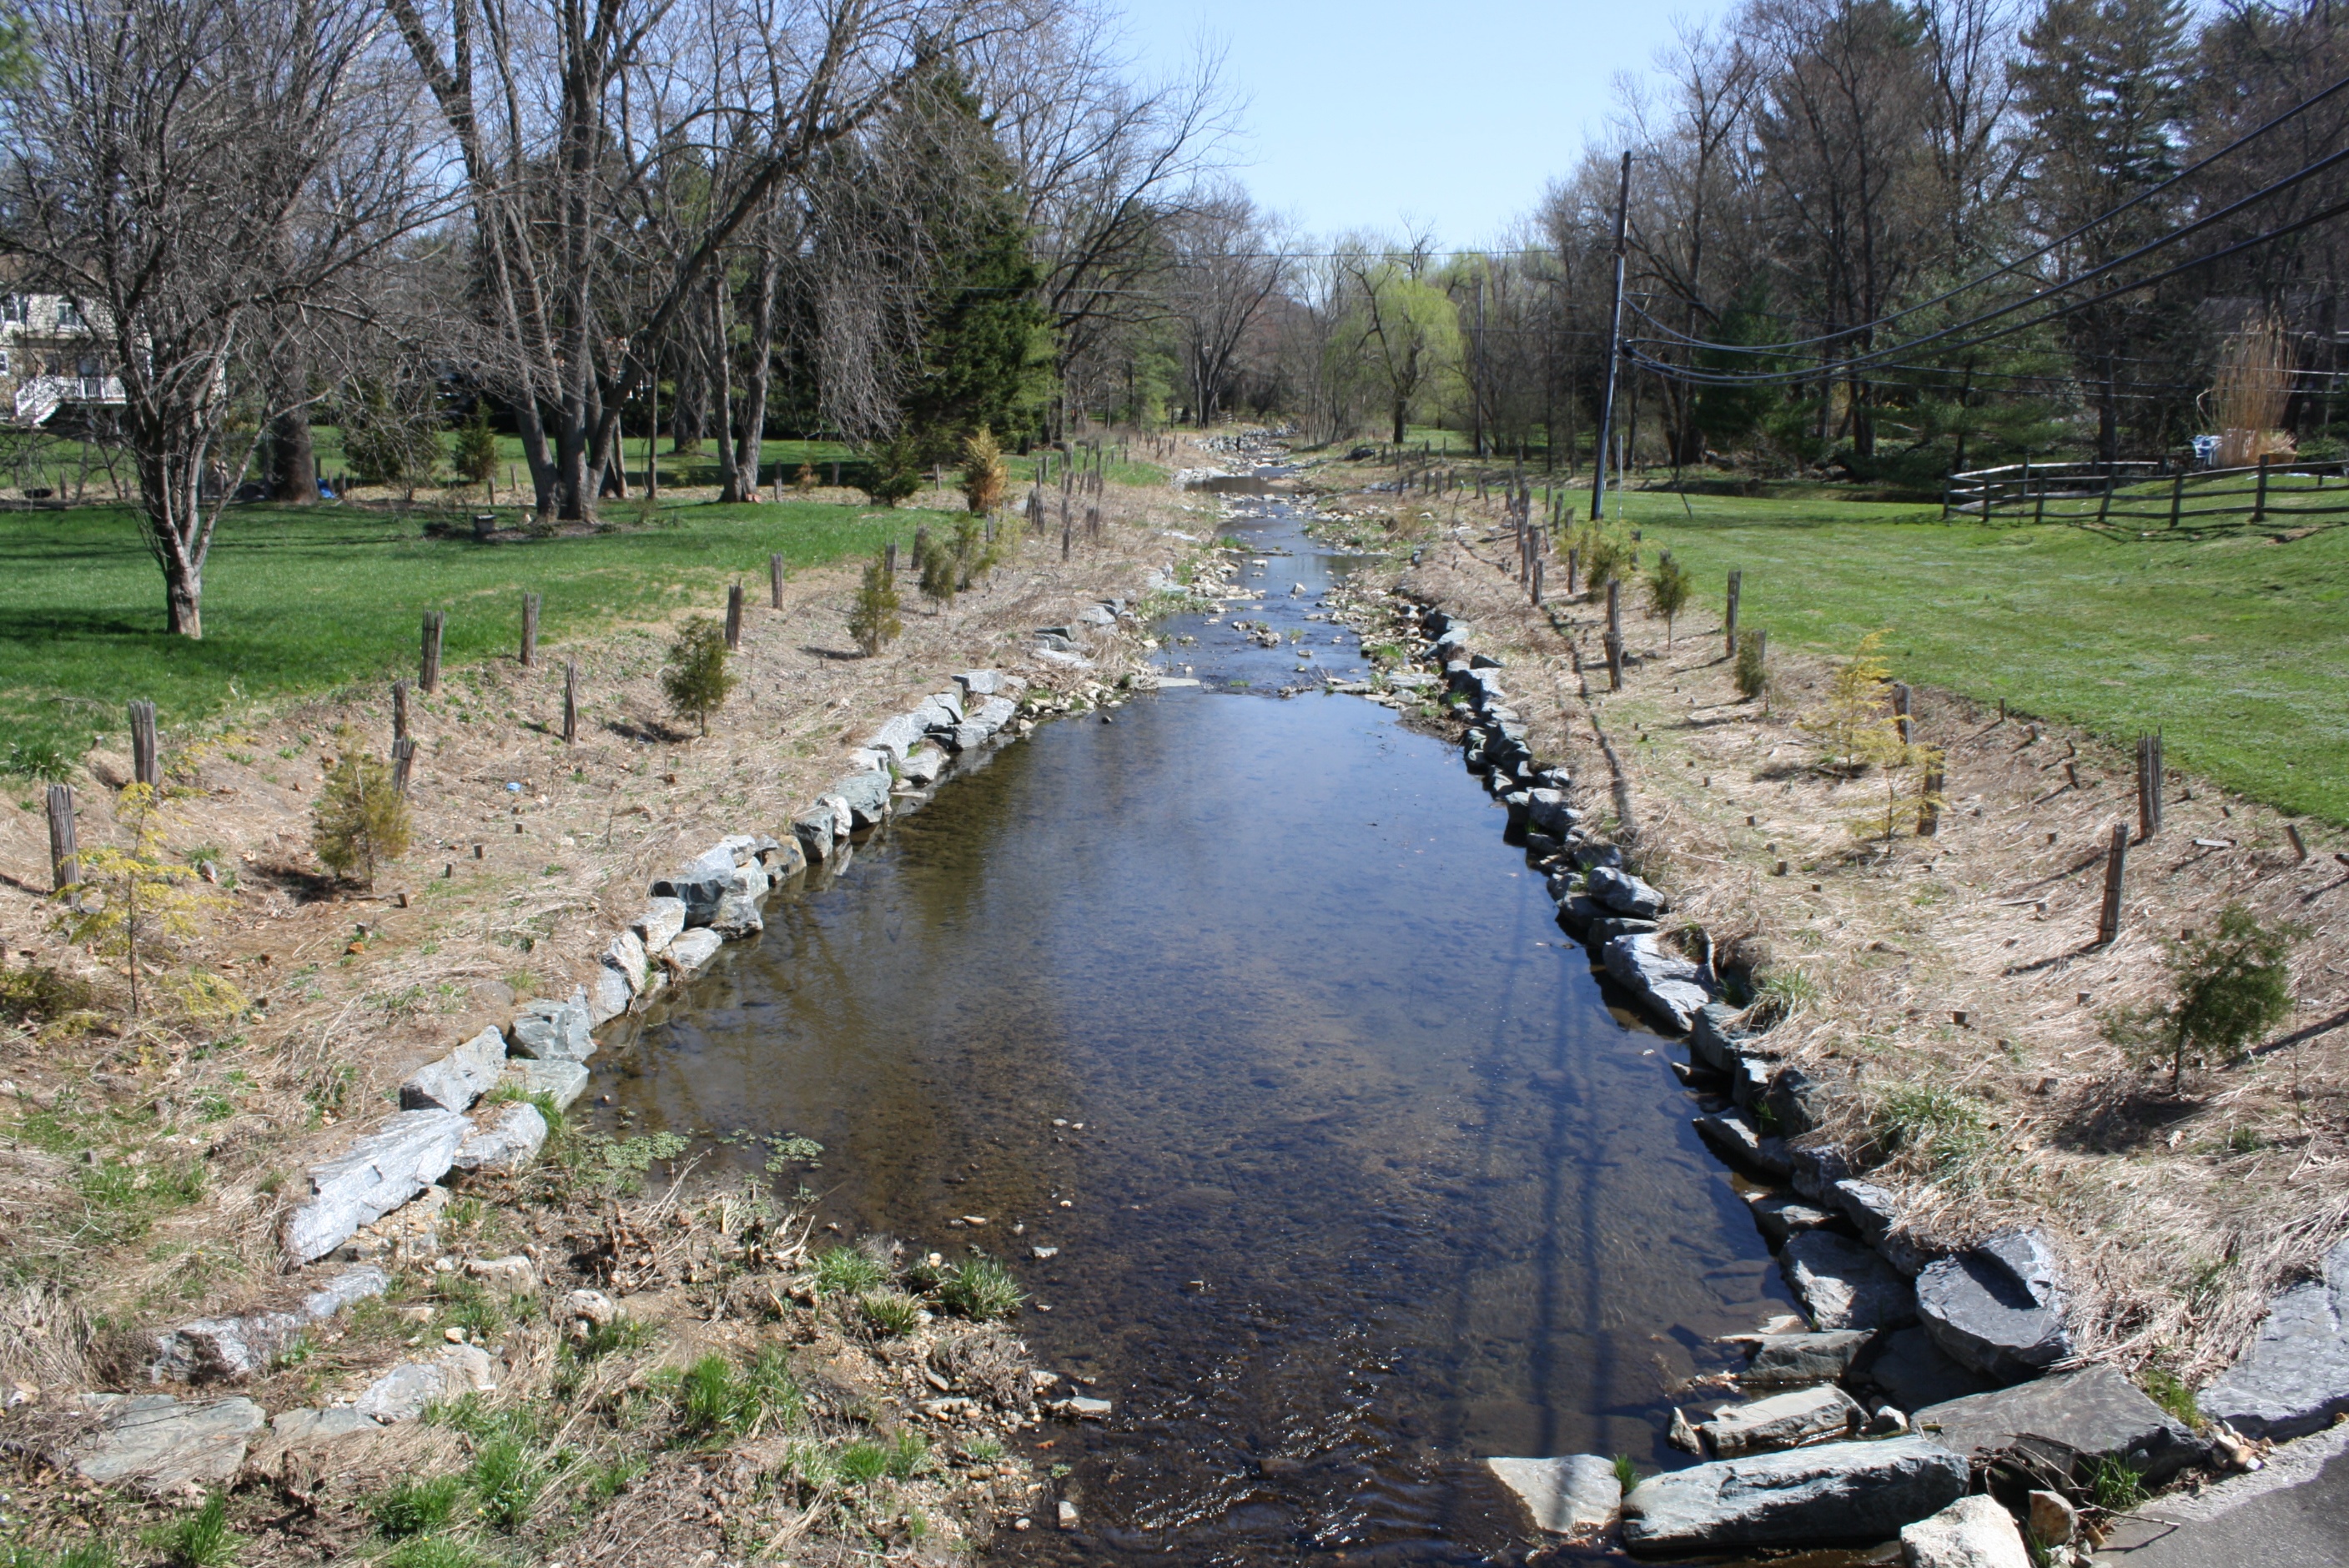 This stream restoration project in Baltimore, Maryland is in an early stage of evolution towards sustainability. A concrete channel that enclosed the stream has been removed, and native tree seedlings have been planted along its banks. Credit: Tamara Newcomer Johnson, University of Maryland